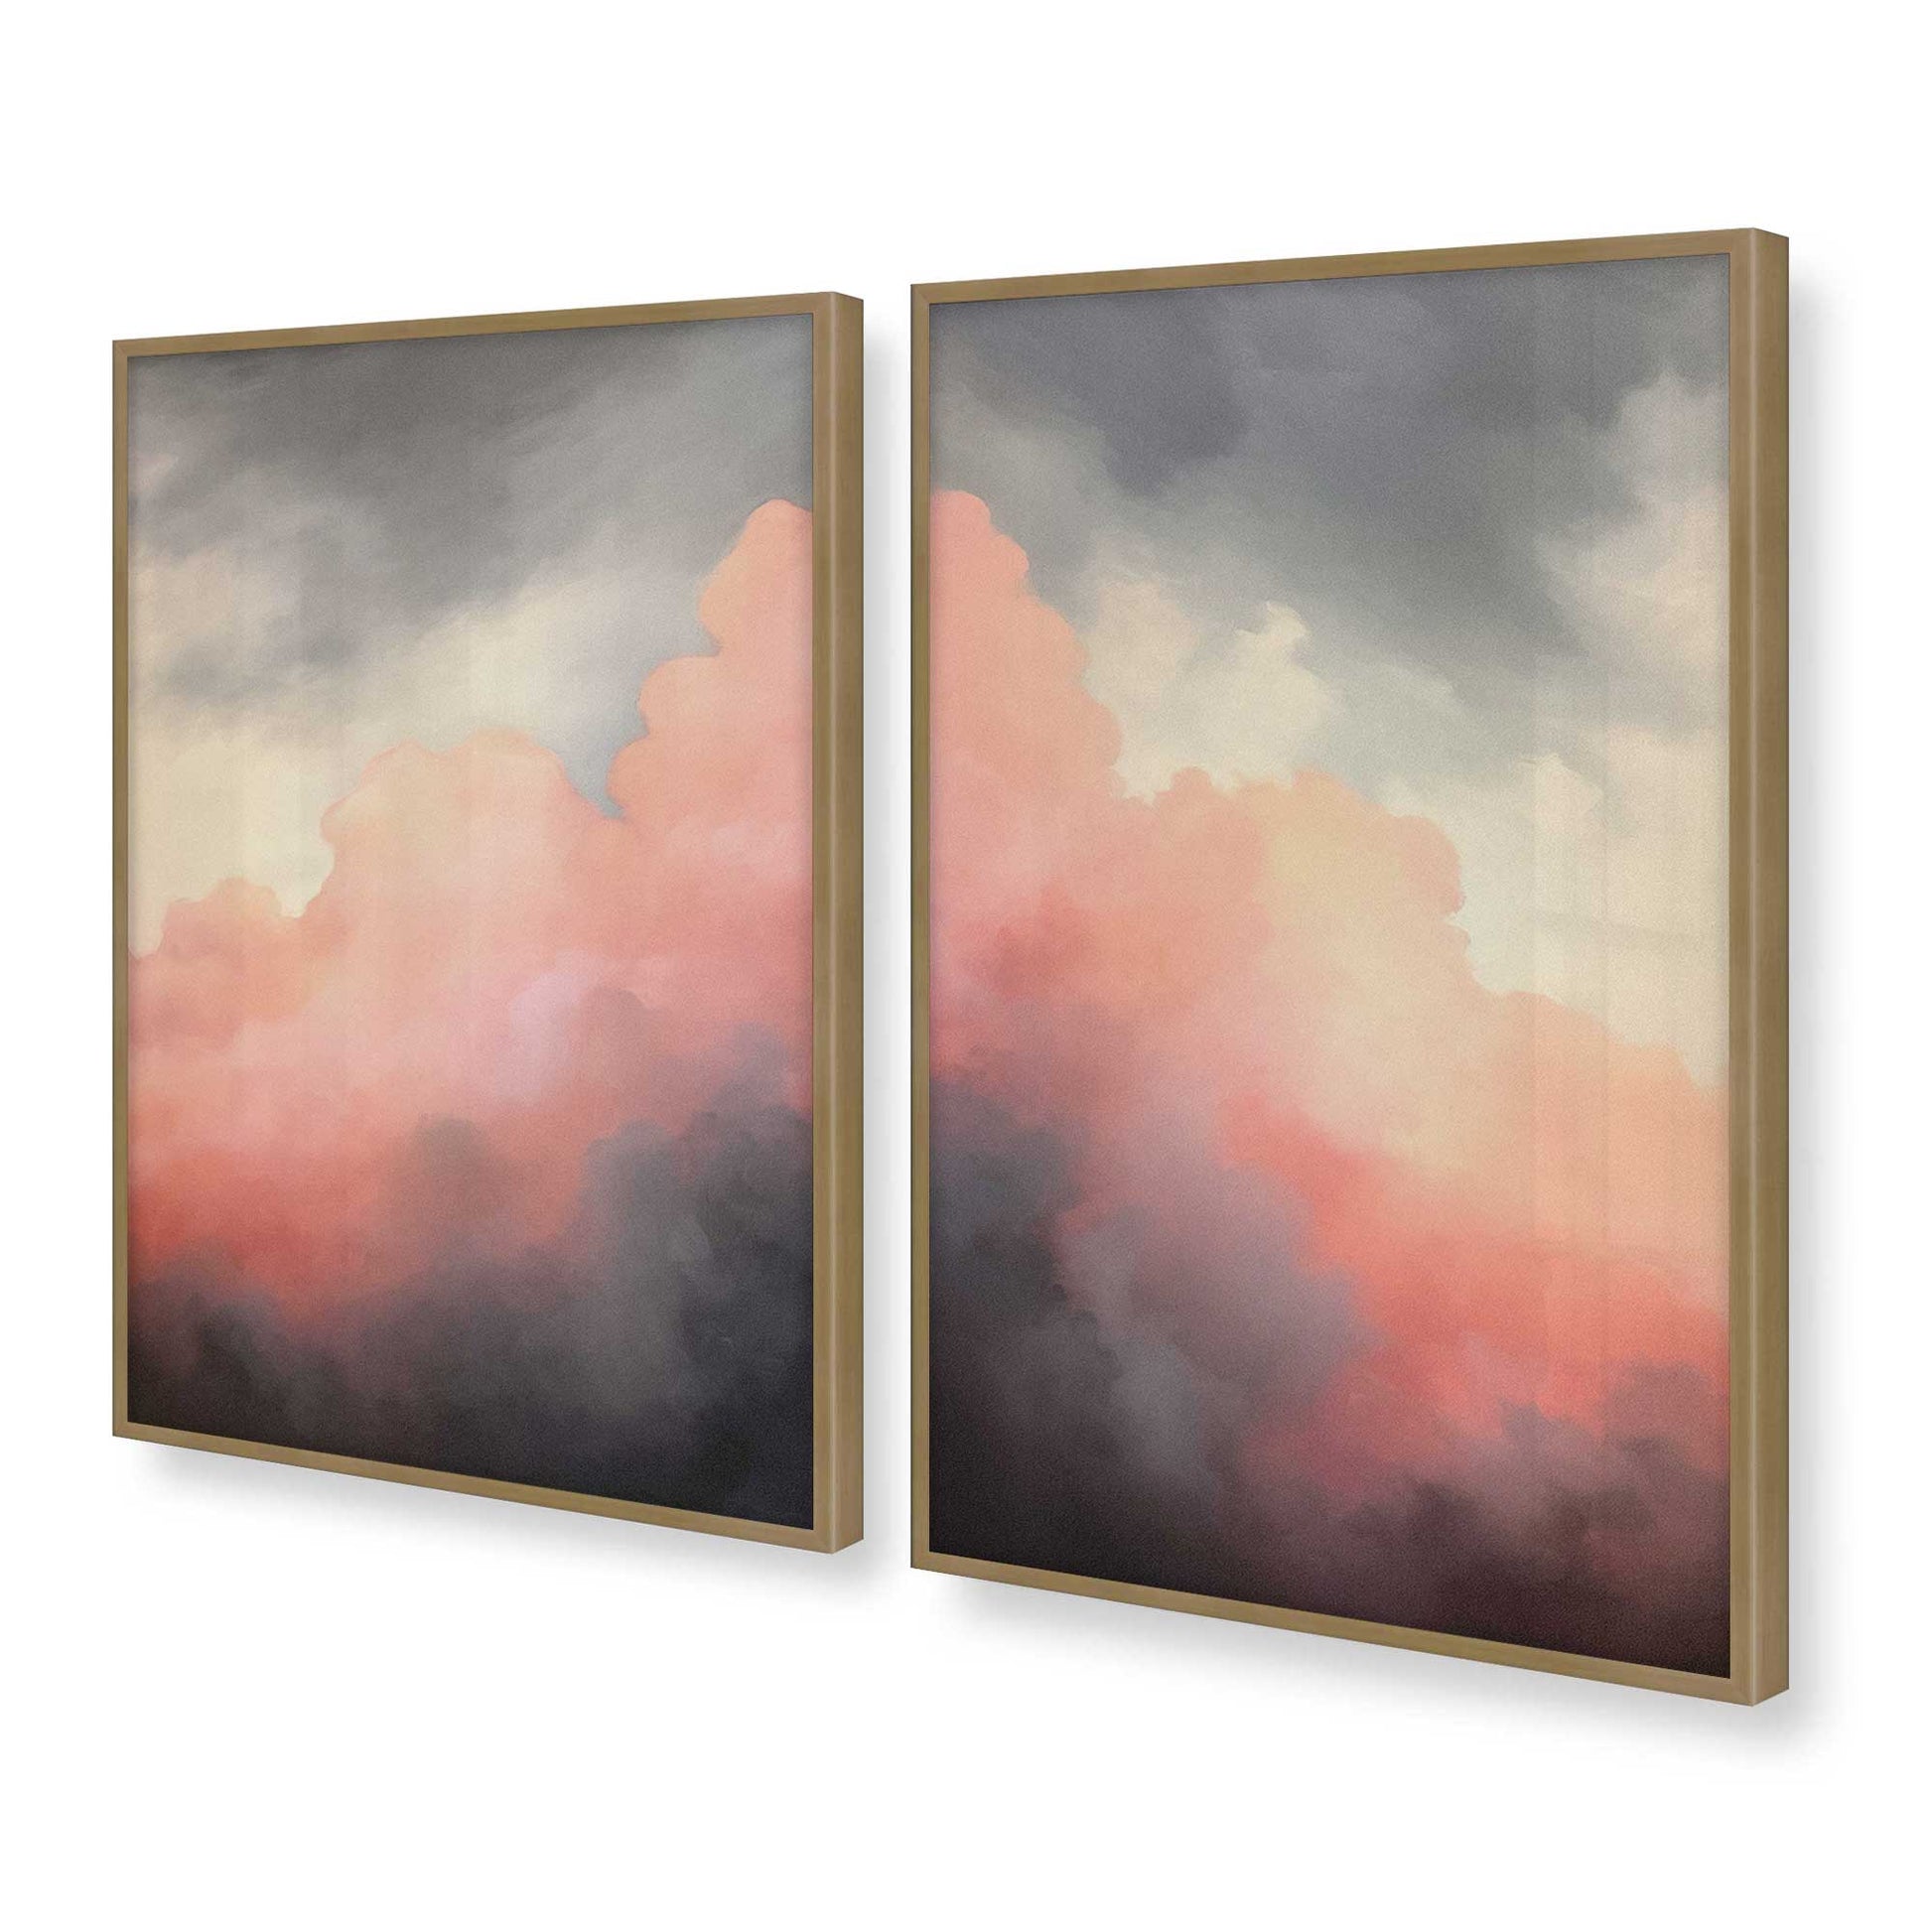 [Color:Brushed Gold] Picture of art in a Brushed Gold frame at an angle